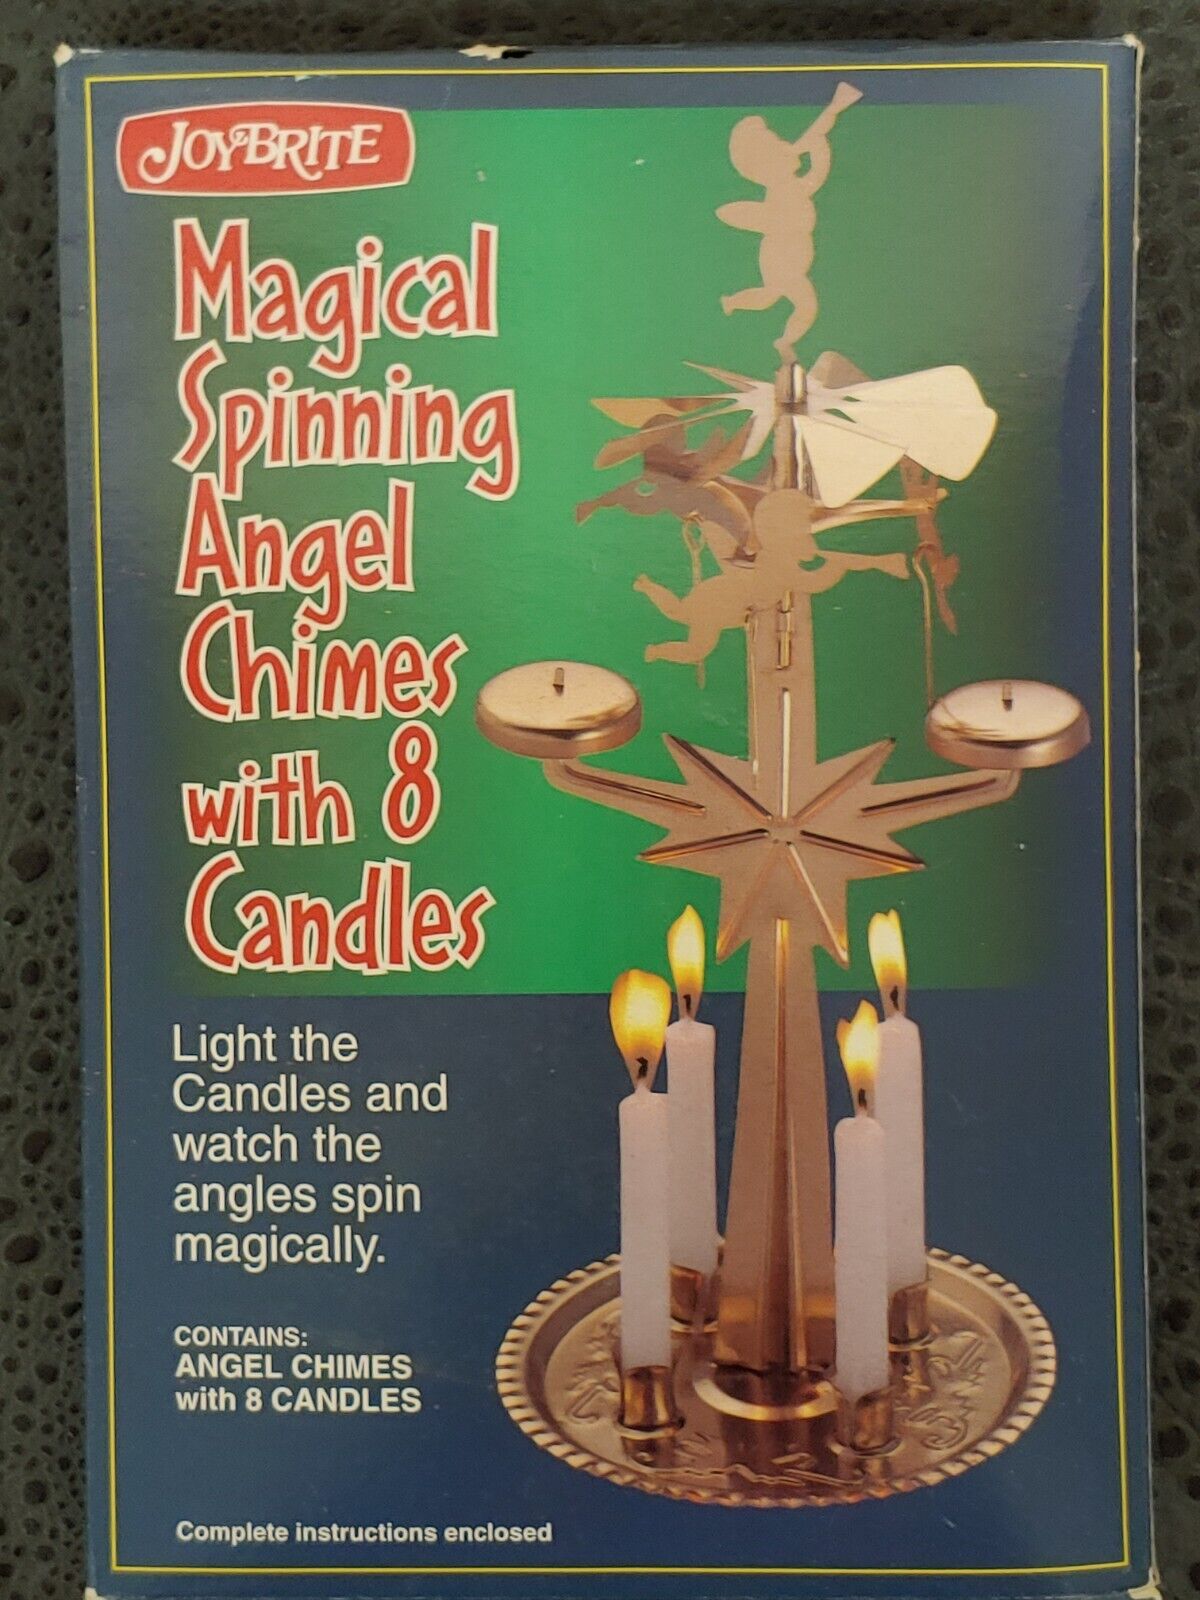 Vintage Magical Spinning Angel Chimes